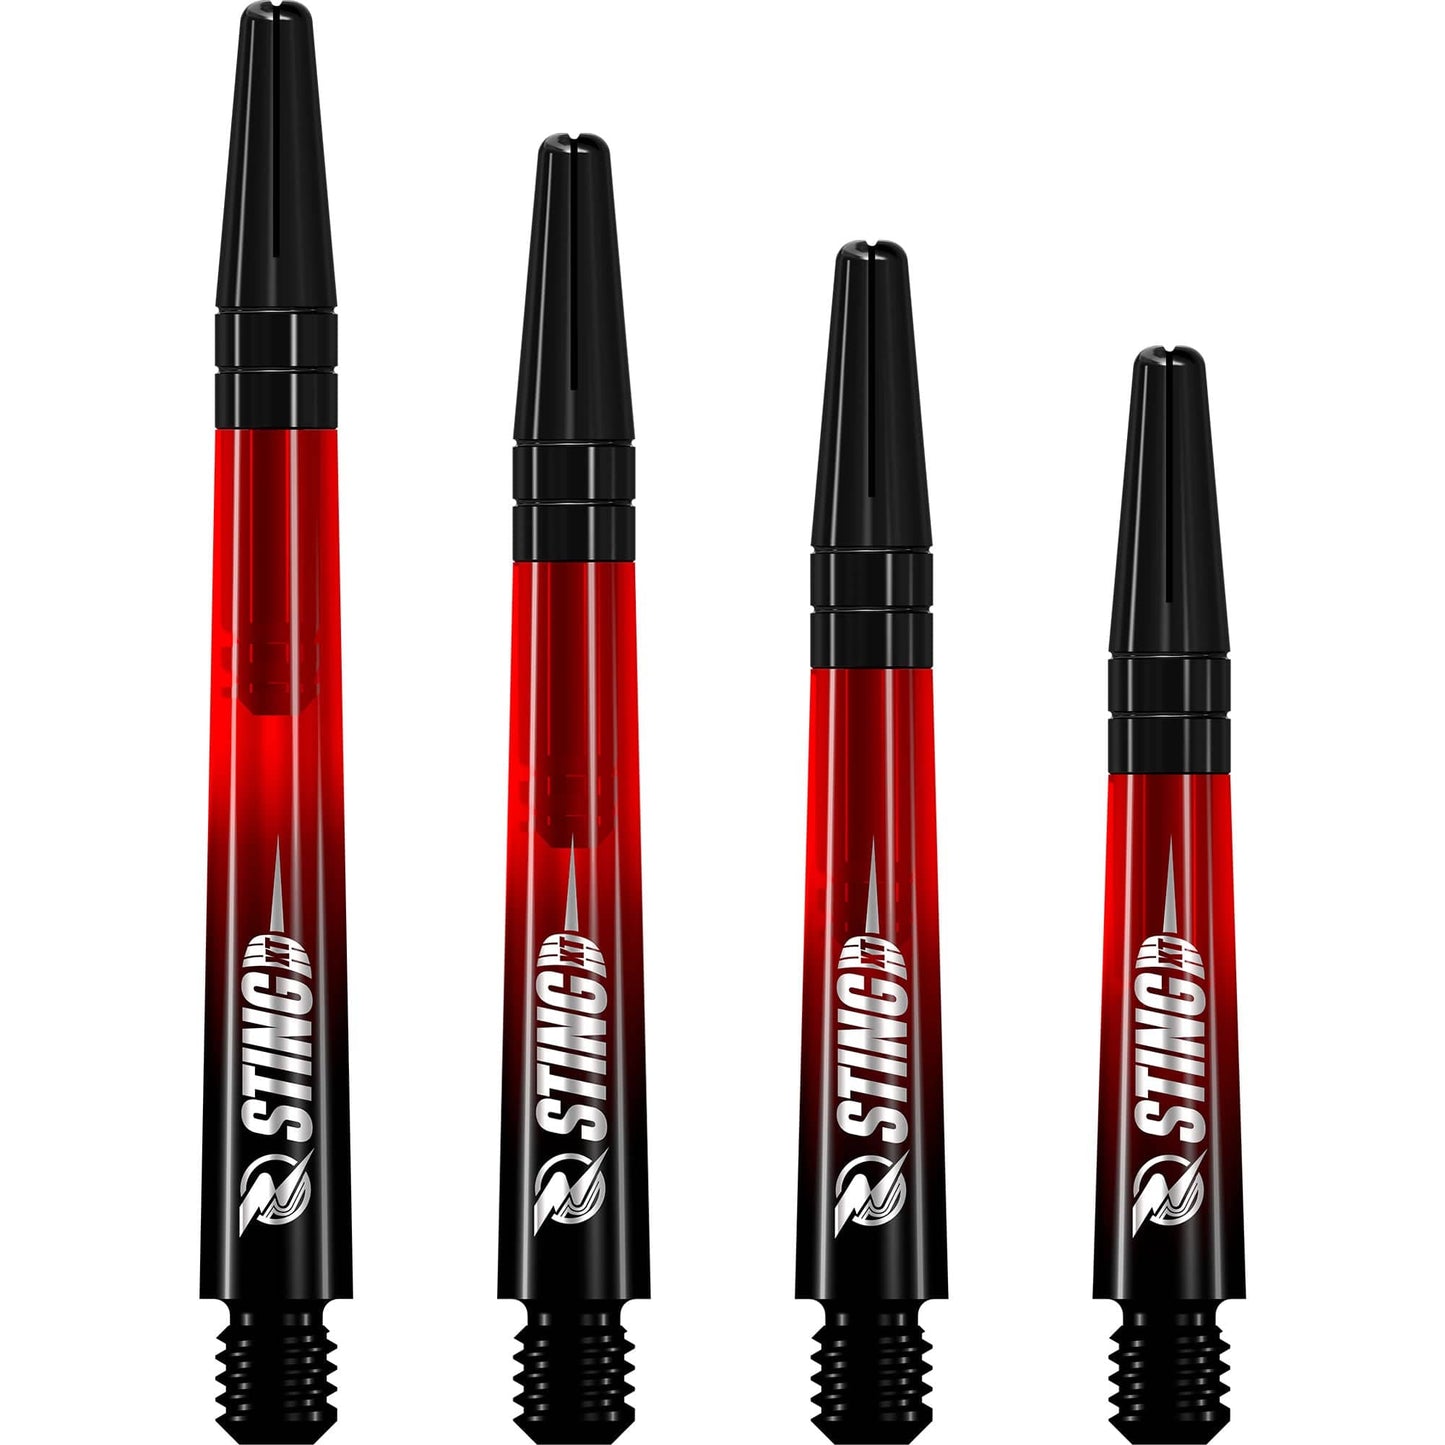 Ruthless Sting XT Dart Shafts - Polycarbonate - Gradient Black & Red - Black Top